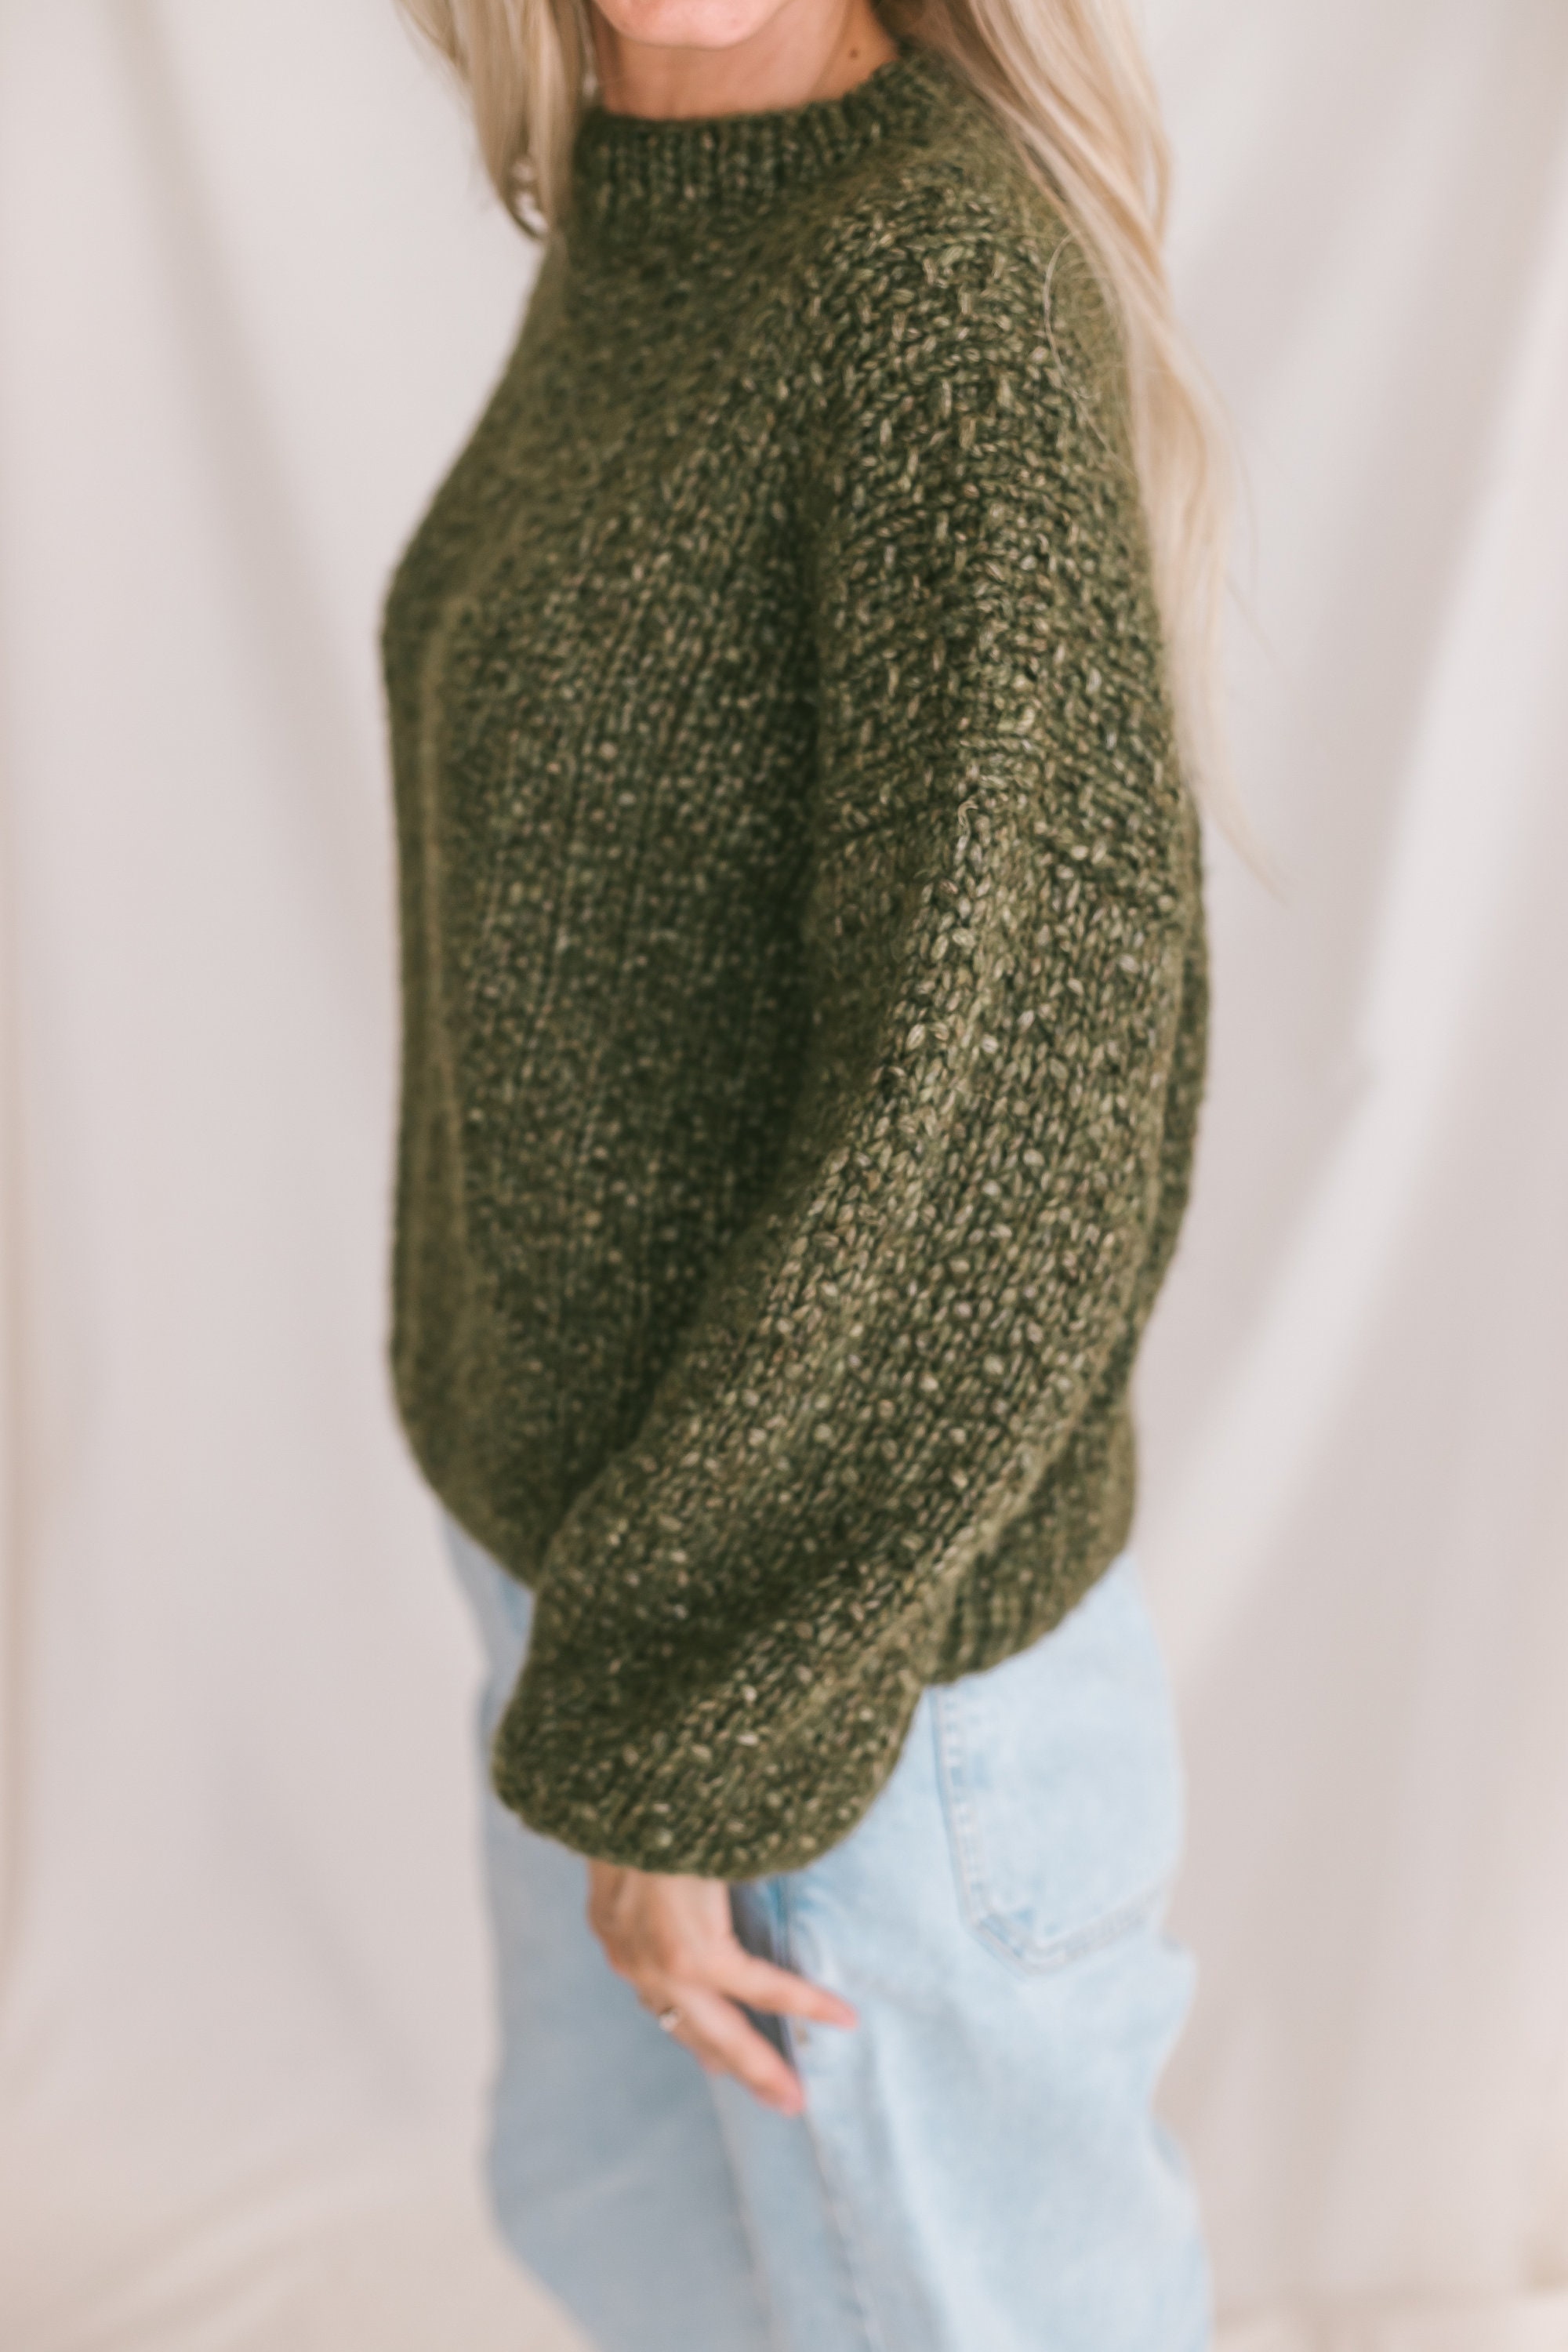 Olive Green Sweater, Soft Cable Knit Jumper, Moss Green Alpaca